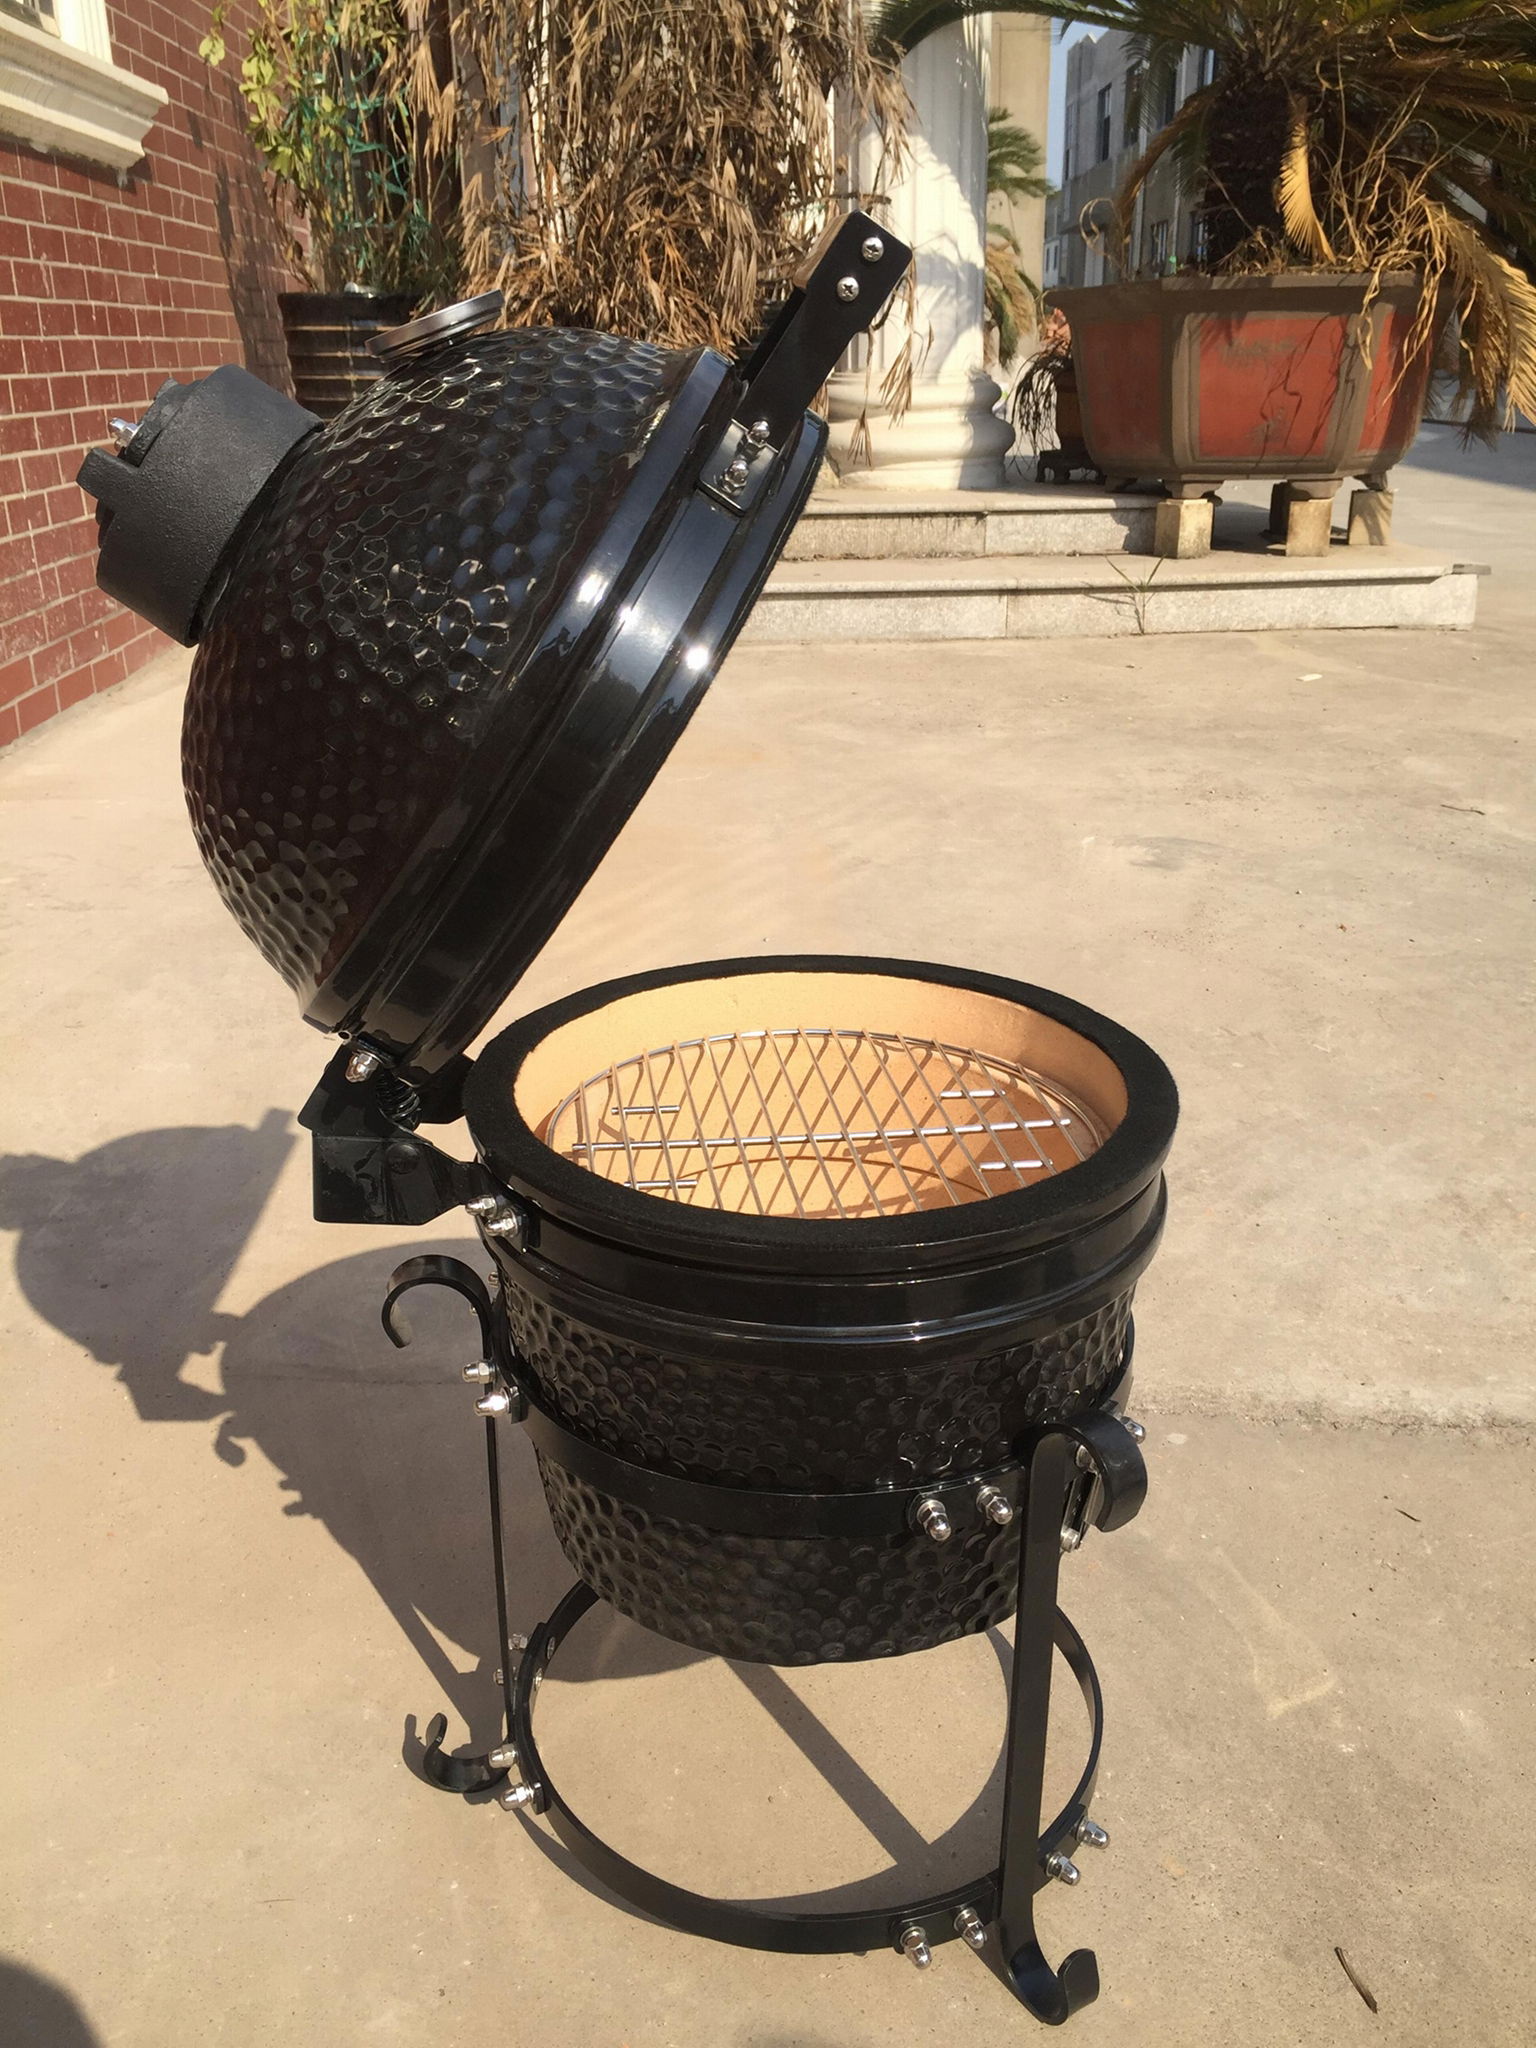 MINI kamado barbecue grill outdoor cooking  4